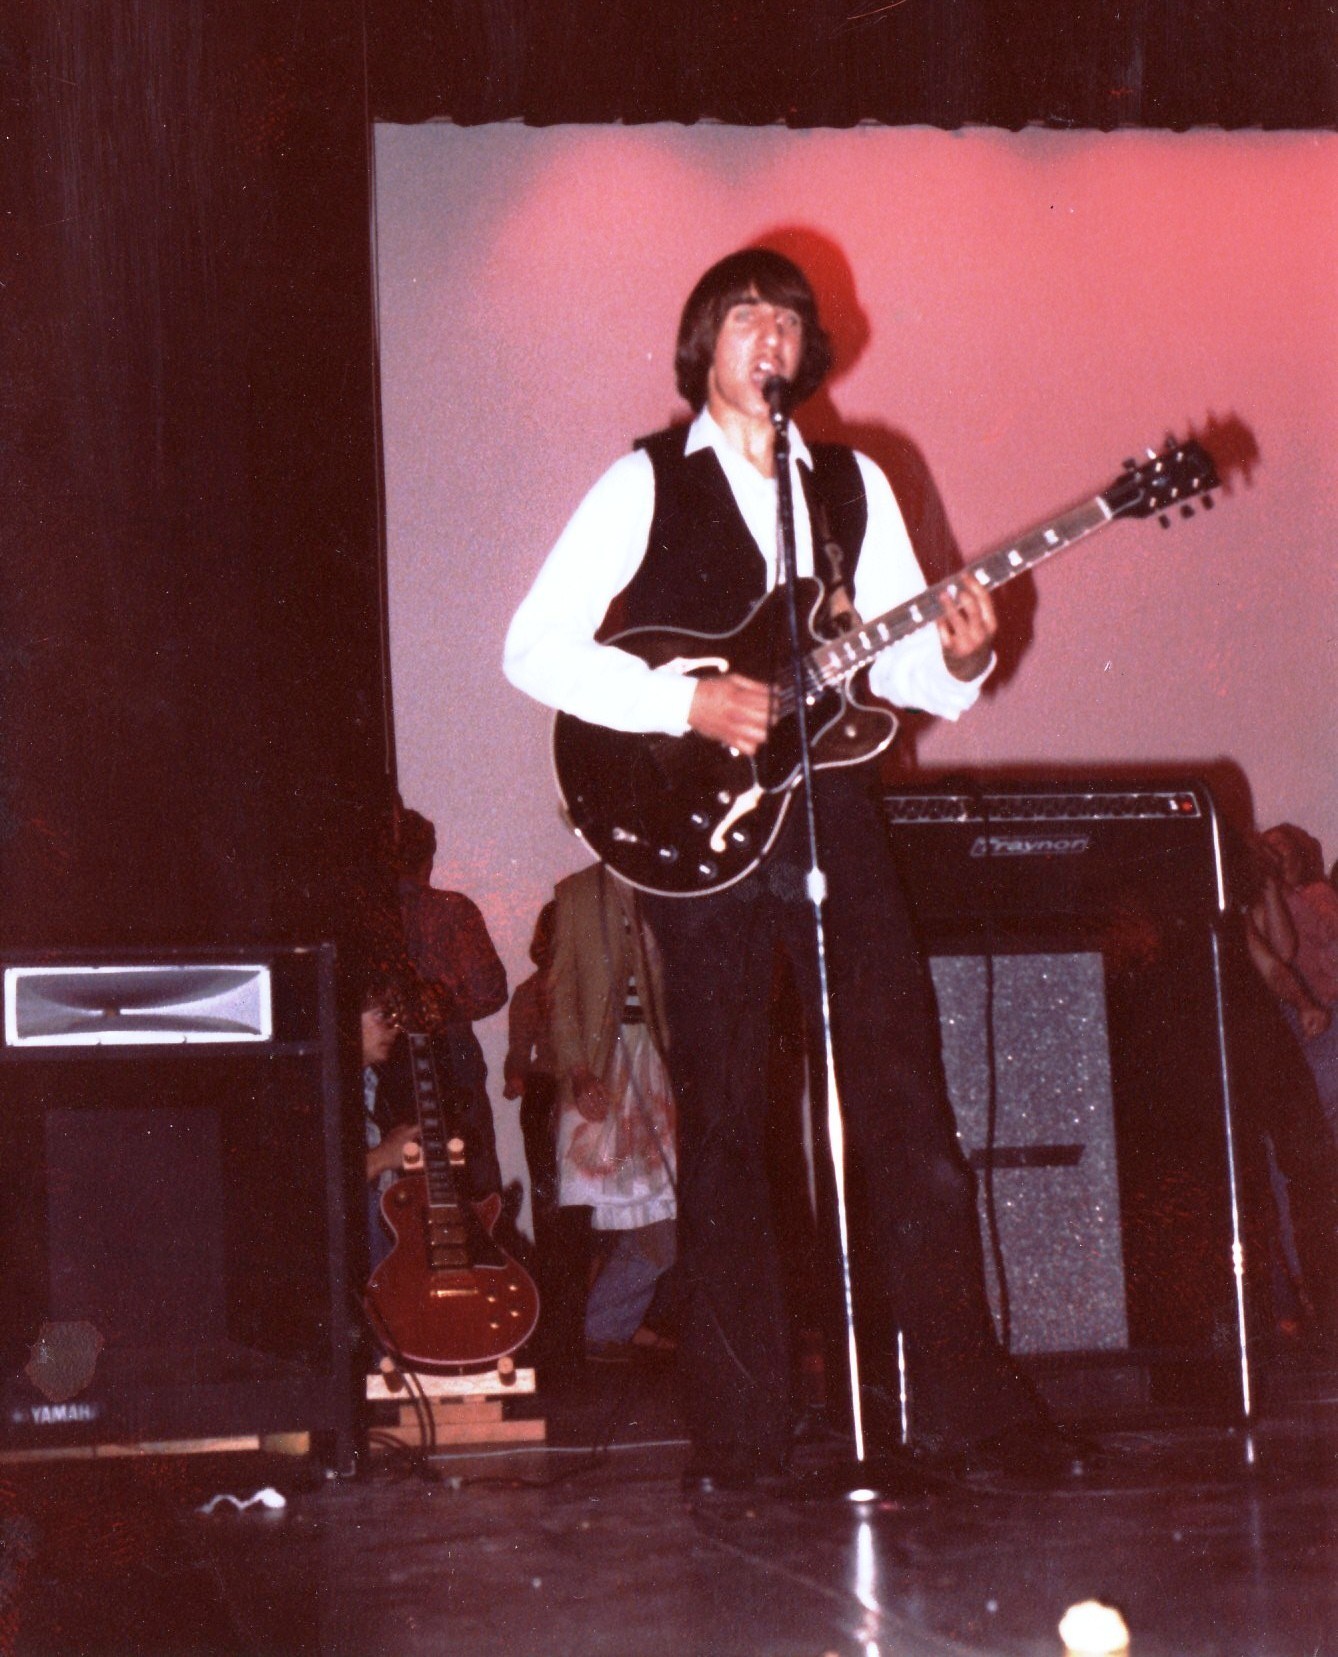 Alex performing live as a background singer and lead guitarist for the band 